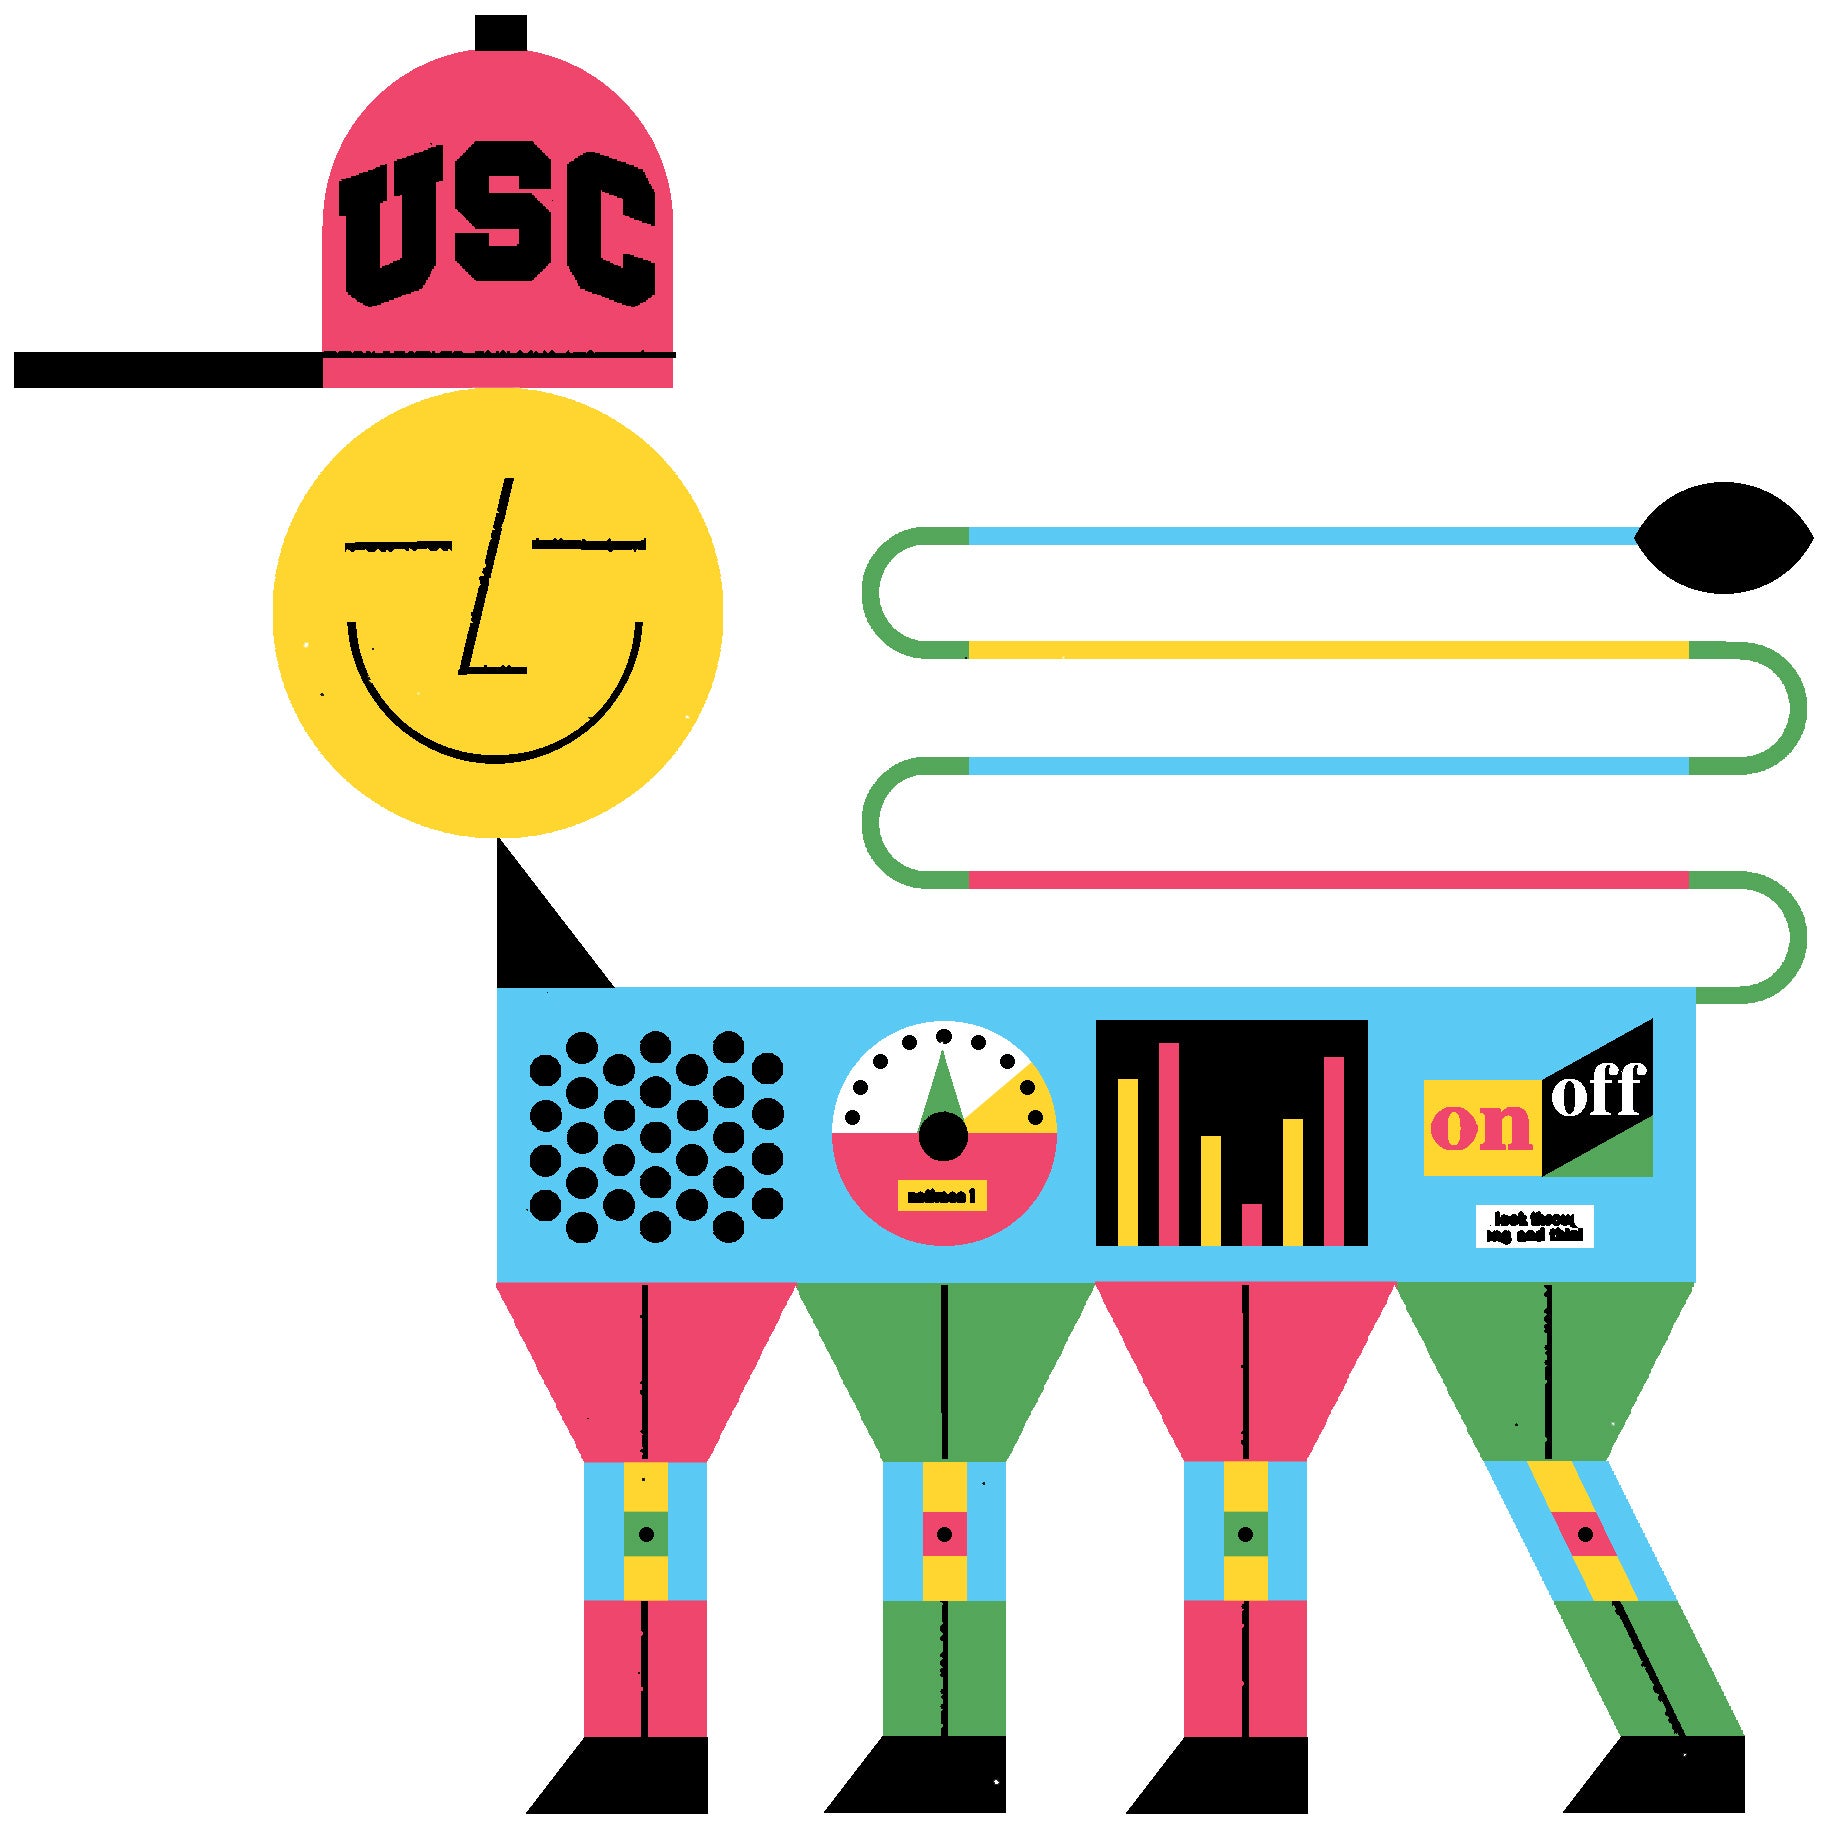 Illustration of a smiley face cat bot wearing a USC hat.